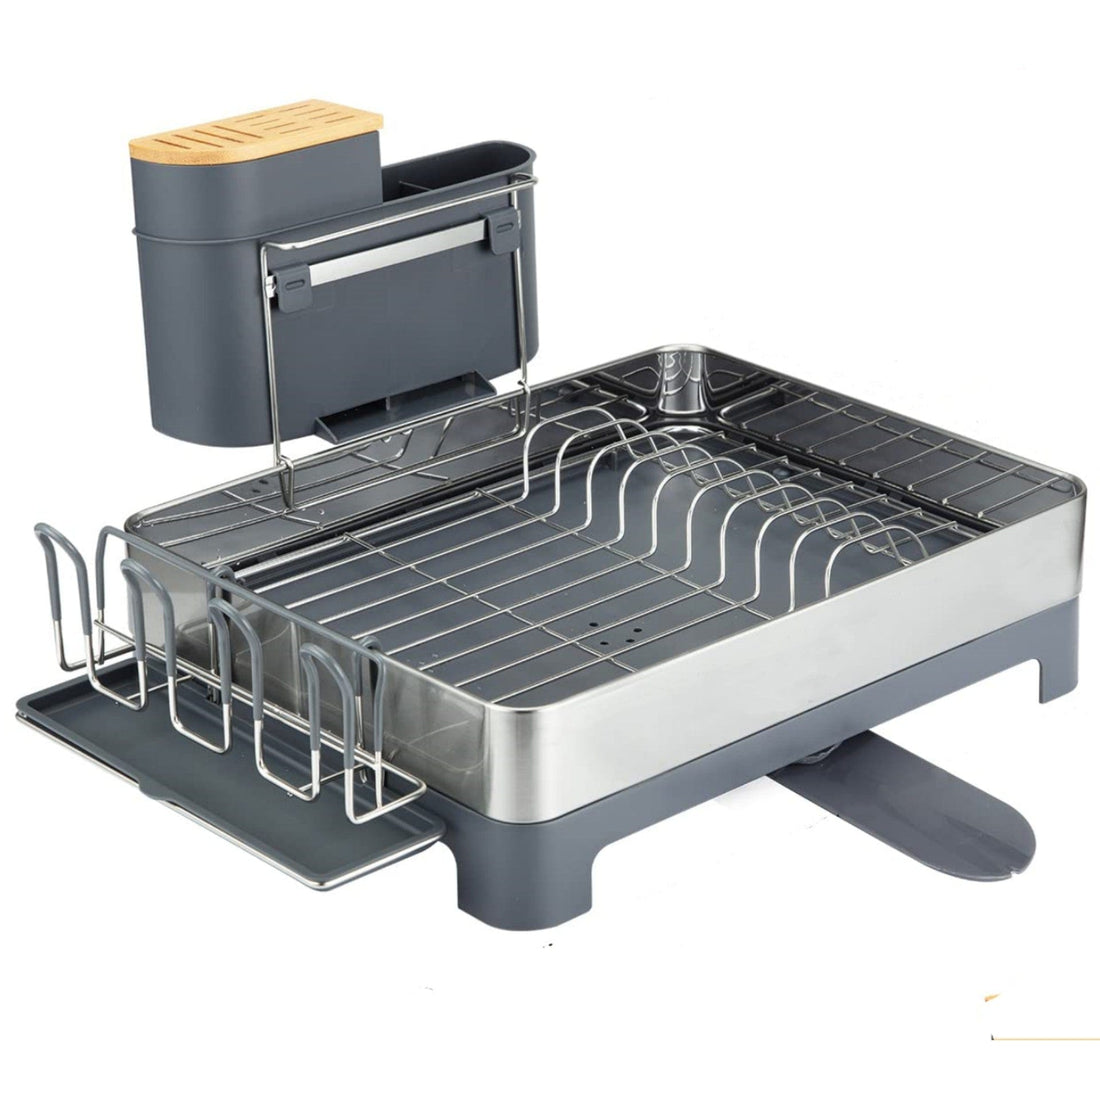 Multifunctional Dish Drying Rack, Steel with Knife Holder